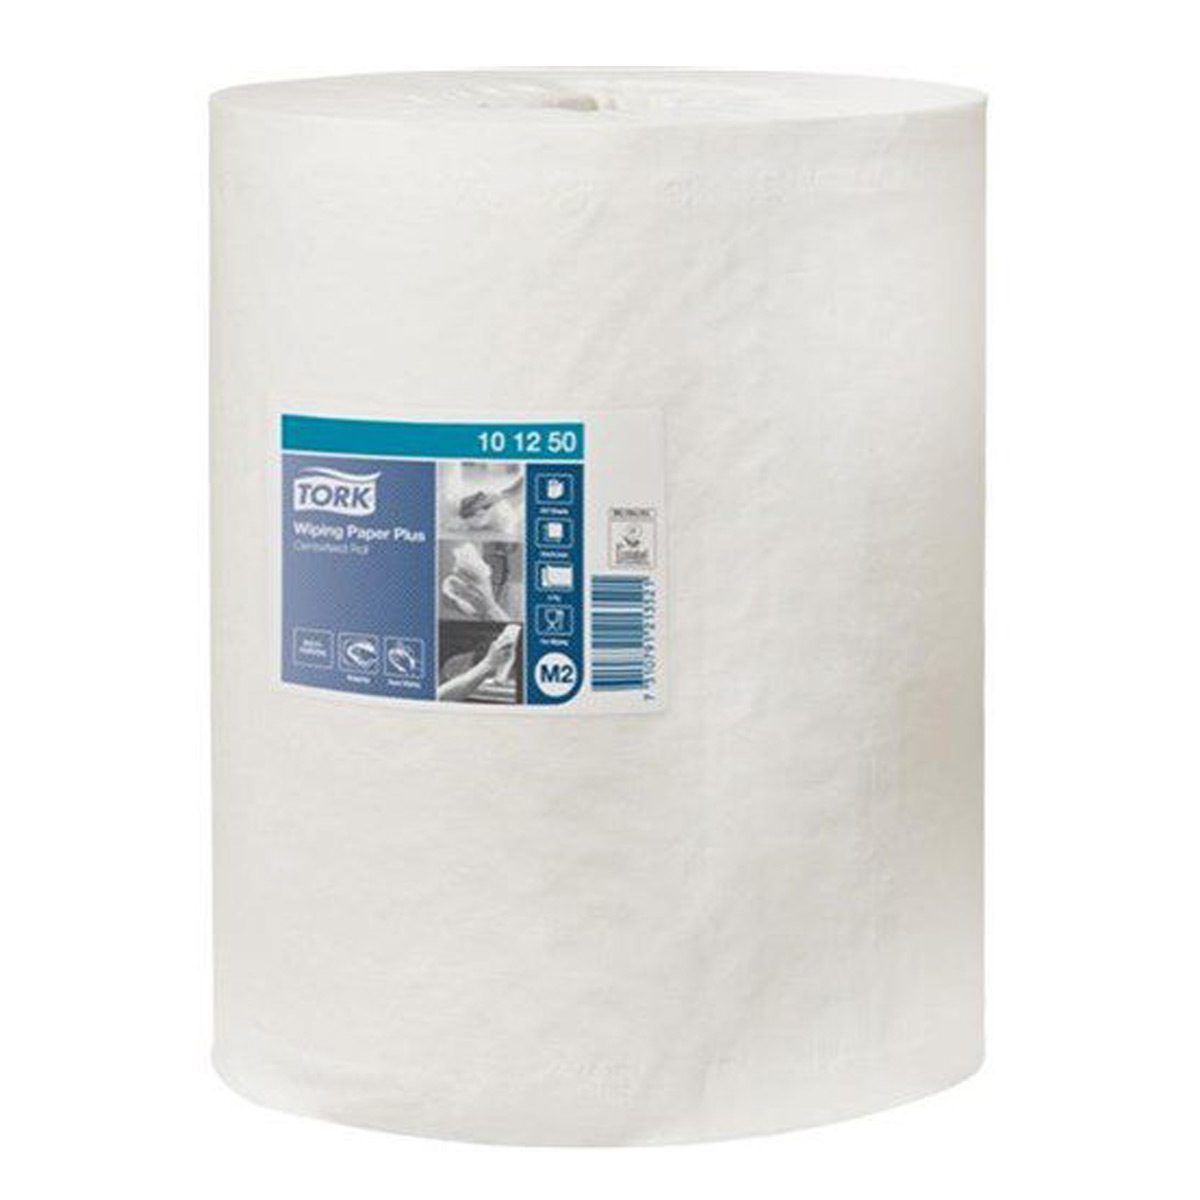 paper-products-paper-towels-tork-wiping-paper-centrefeed-2-ply-6-x160m-metre-rolls-m2-high-capacity-versatile-solution-professional-environments-hand-and-surface-wiping-vjs-distributors-101250